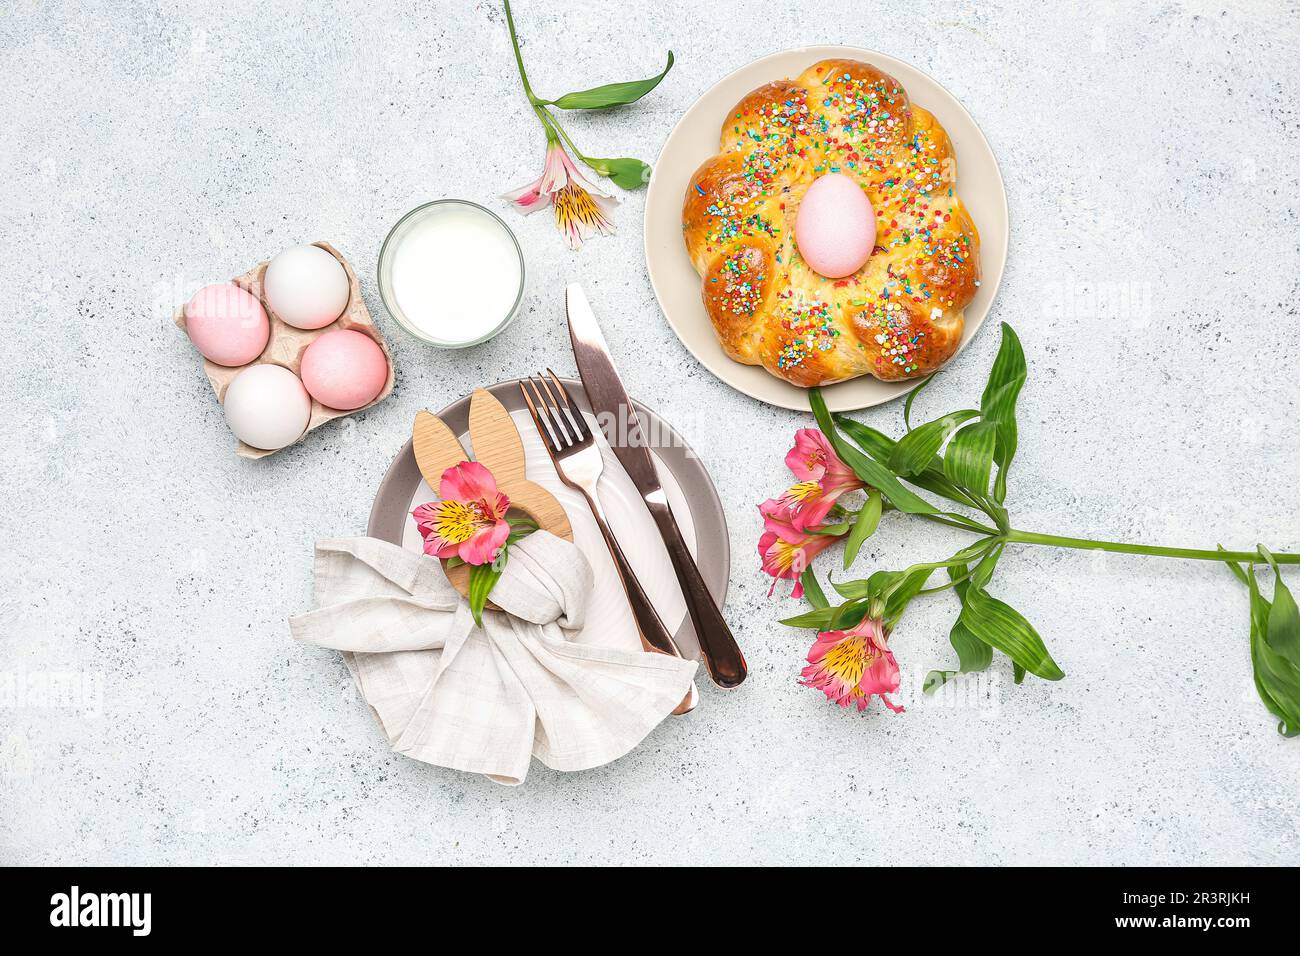 Table setting with tasty Italian Easter bread, eggs, glass of milk and  flowers on light background Stock Photo - Alamy